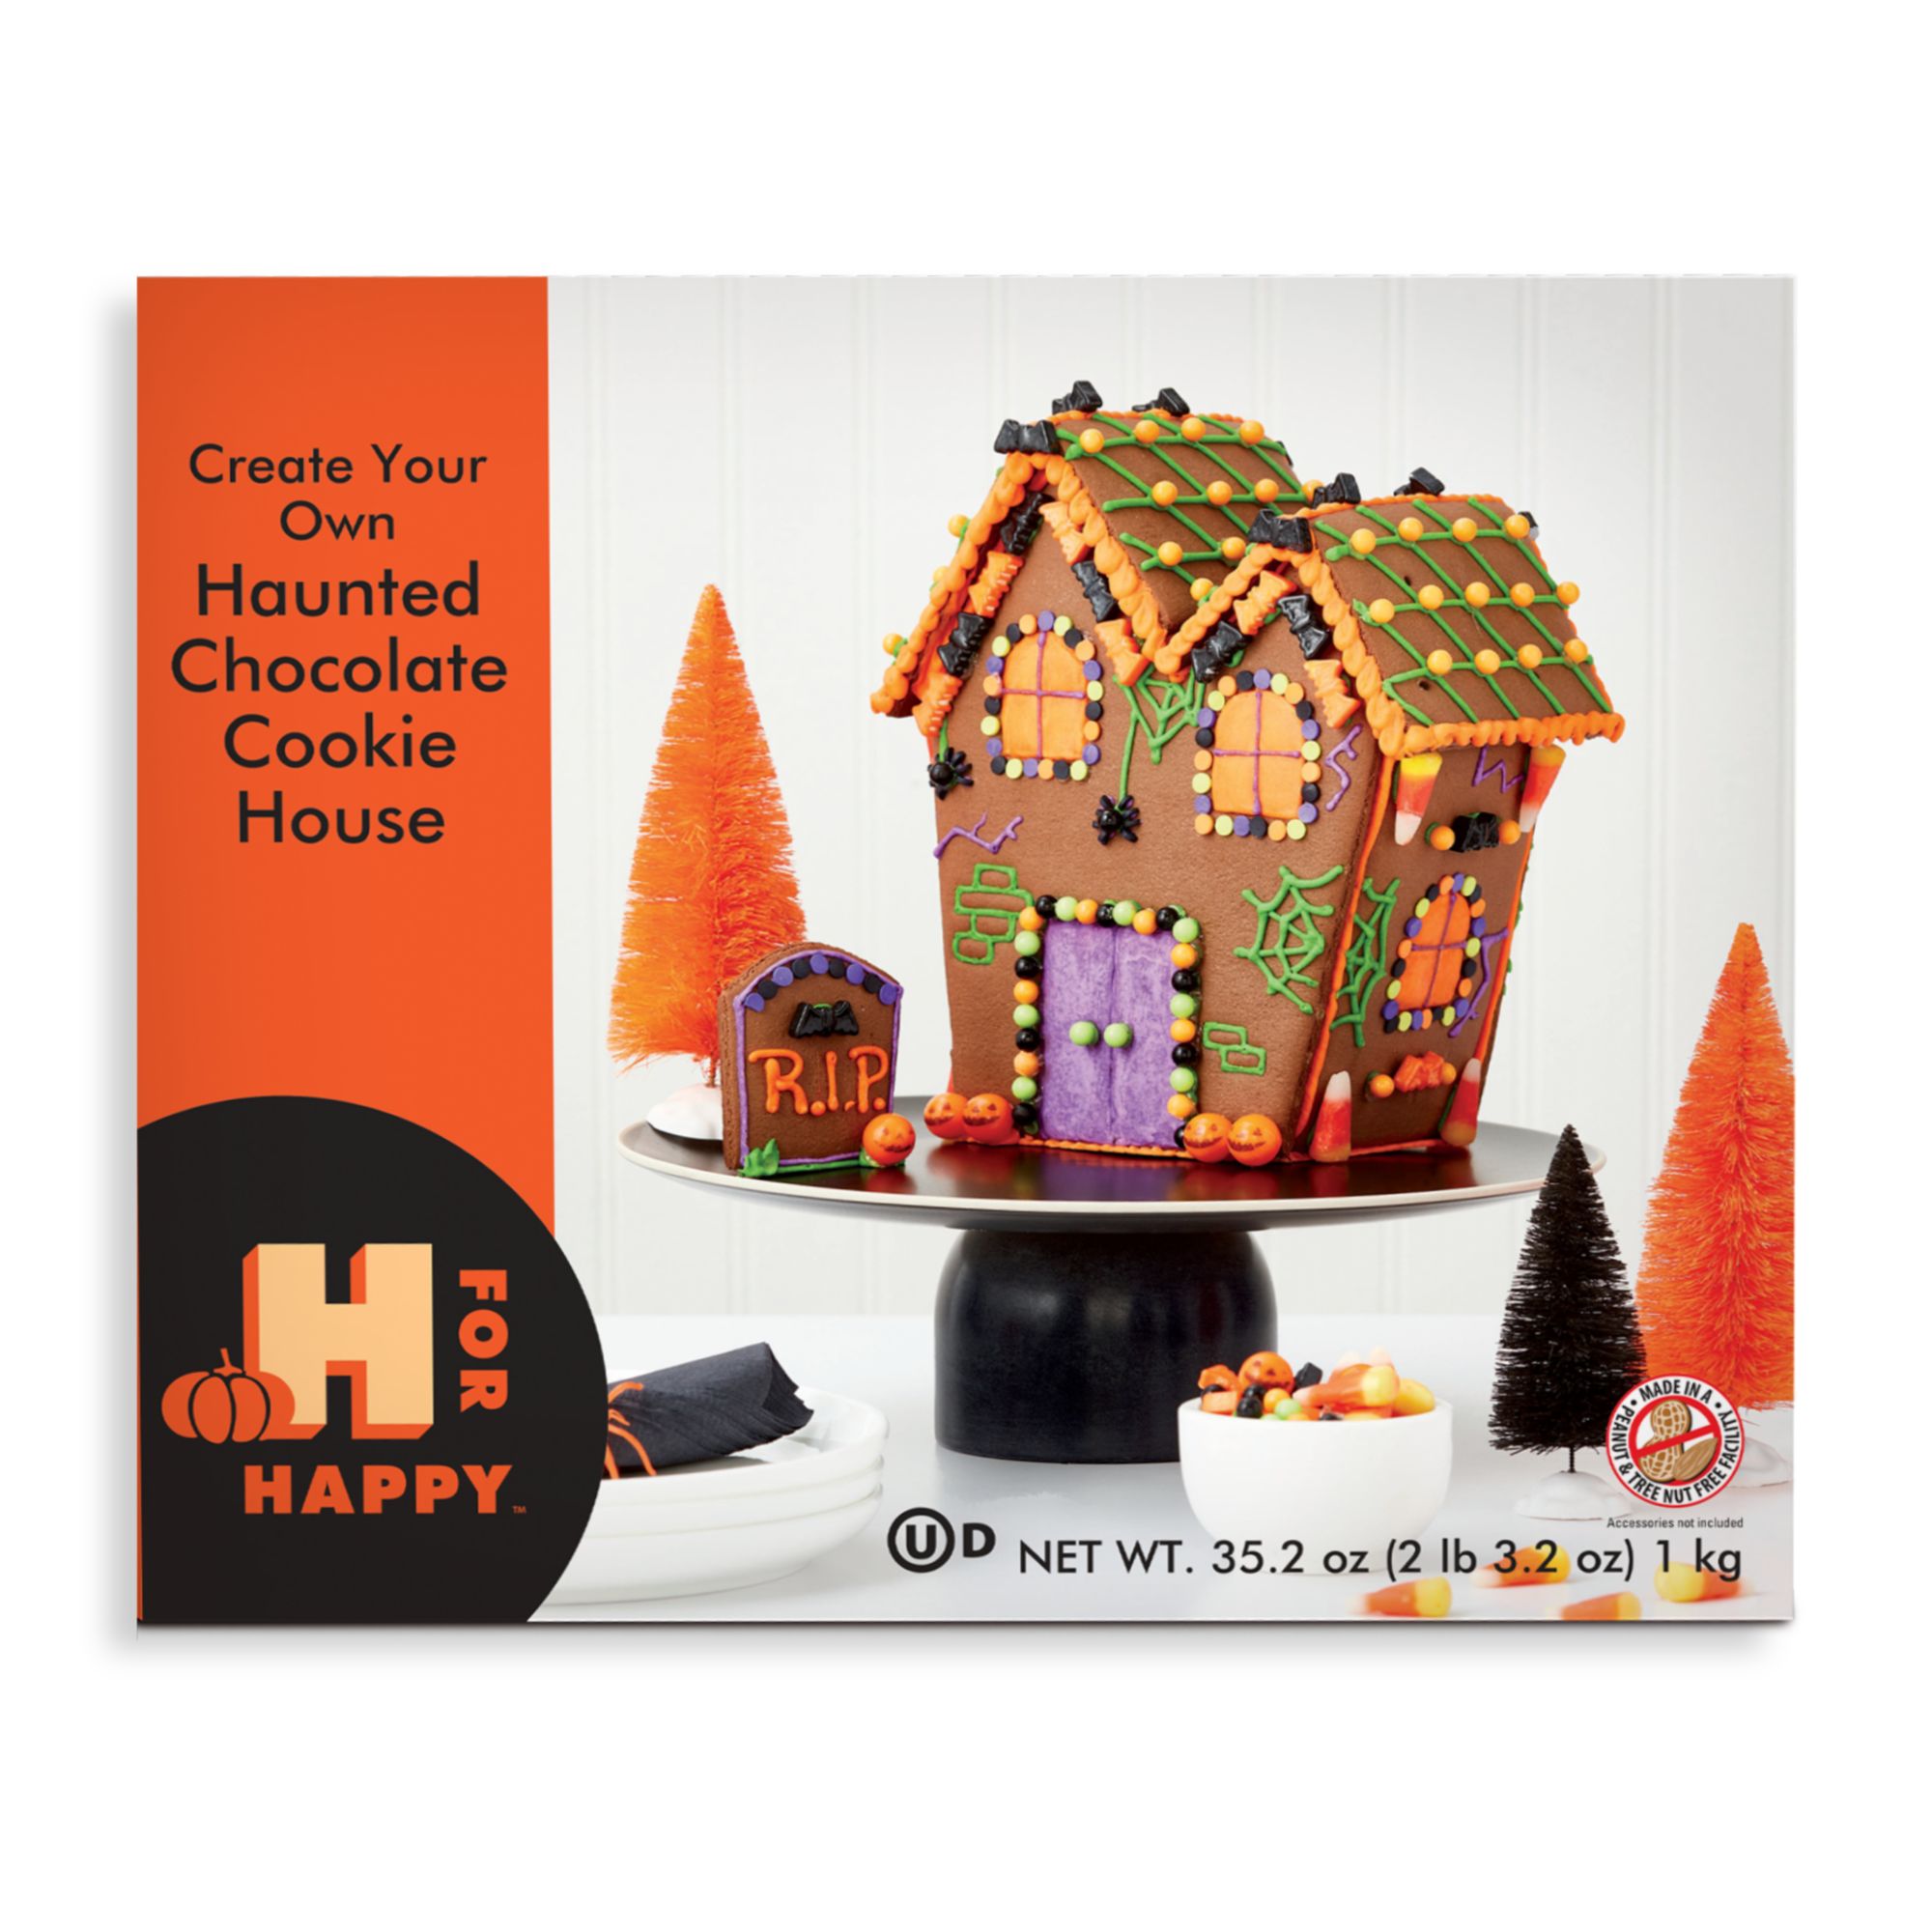 bedbathandbeyond.com | H for Happy™ Halloween Haunted DIY Gingerbread House in Chocolate